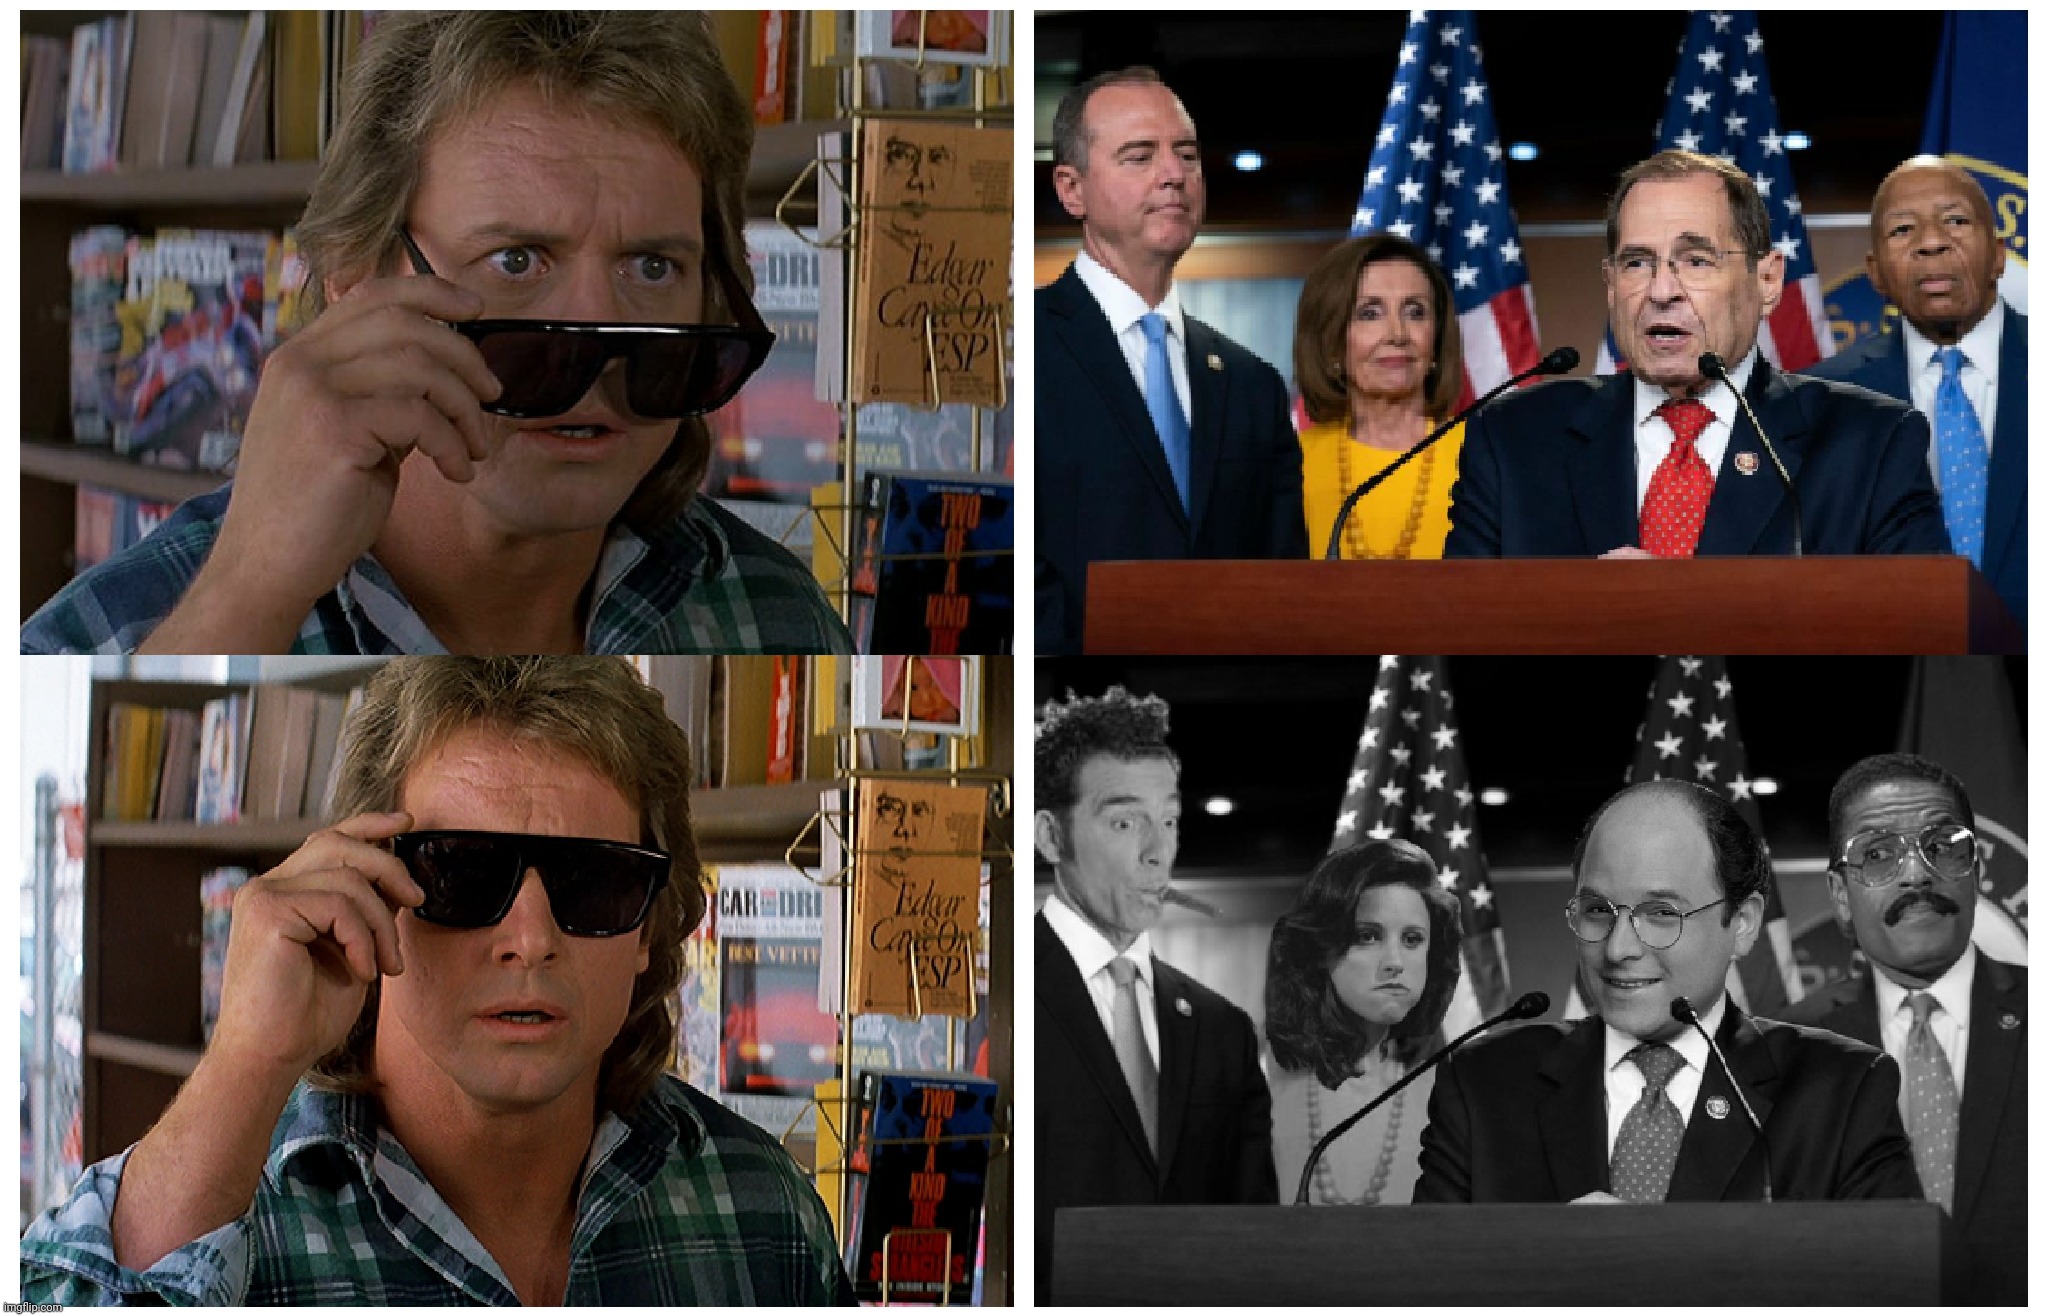 Bad Photoshop Sunday presents:  They lie (suggested by The_Original_Abby_Normal) | image tagged in bad photoshop sunday,seinfeld,they live,adam schiff,nancy pelosi,jerry nadler | made w/ Imgflip meme maker